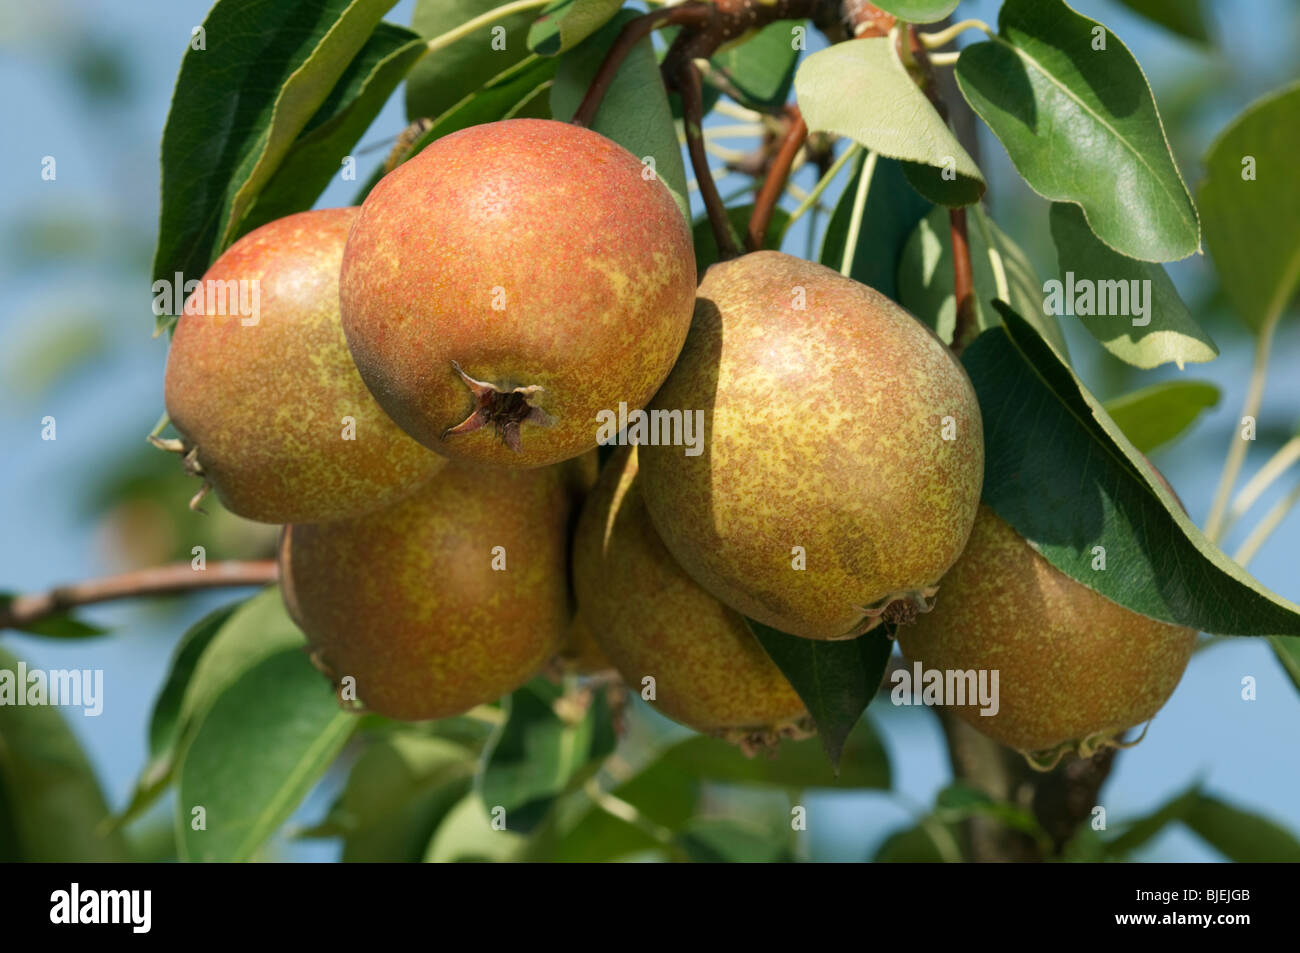 Common Pear, European Pear (Pyrus communis), variety: Gute Luise von Avranches. Fruit on a tree. Stock Photo